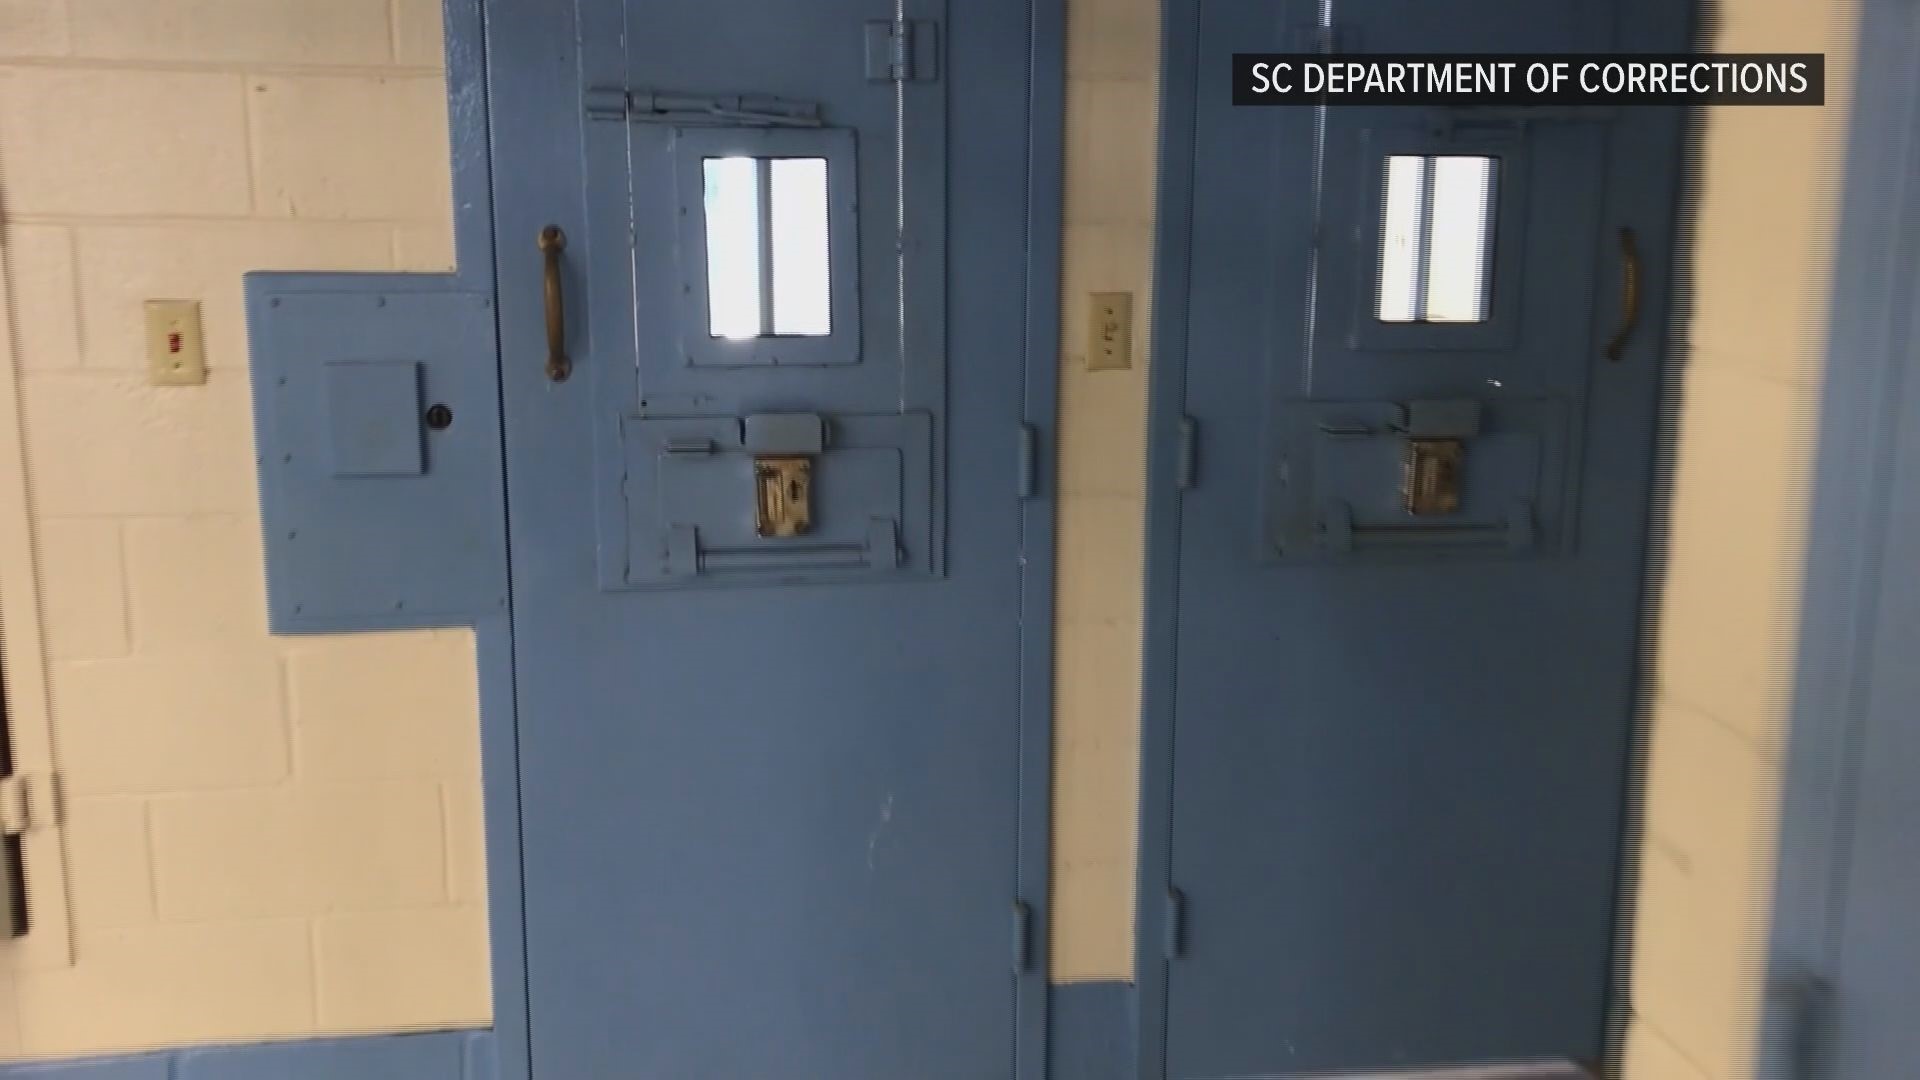 This video shows South Carolina's new Death Row facility at Broad River Correctional Institution.